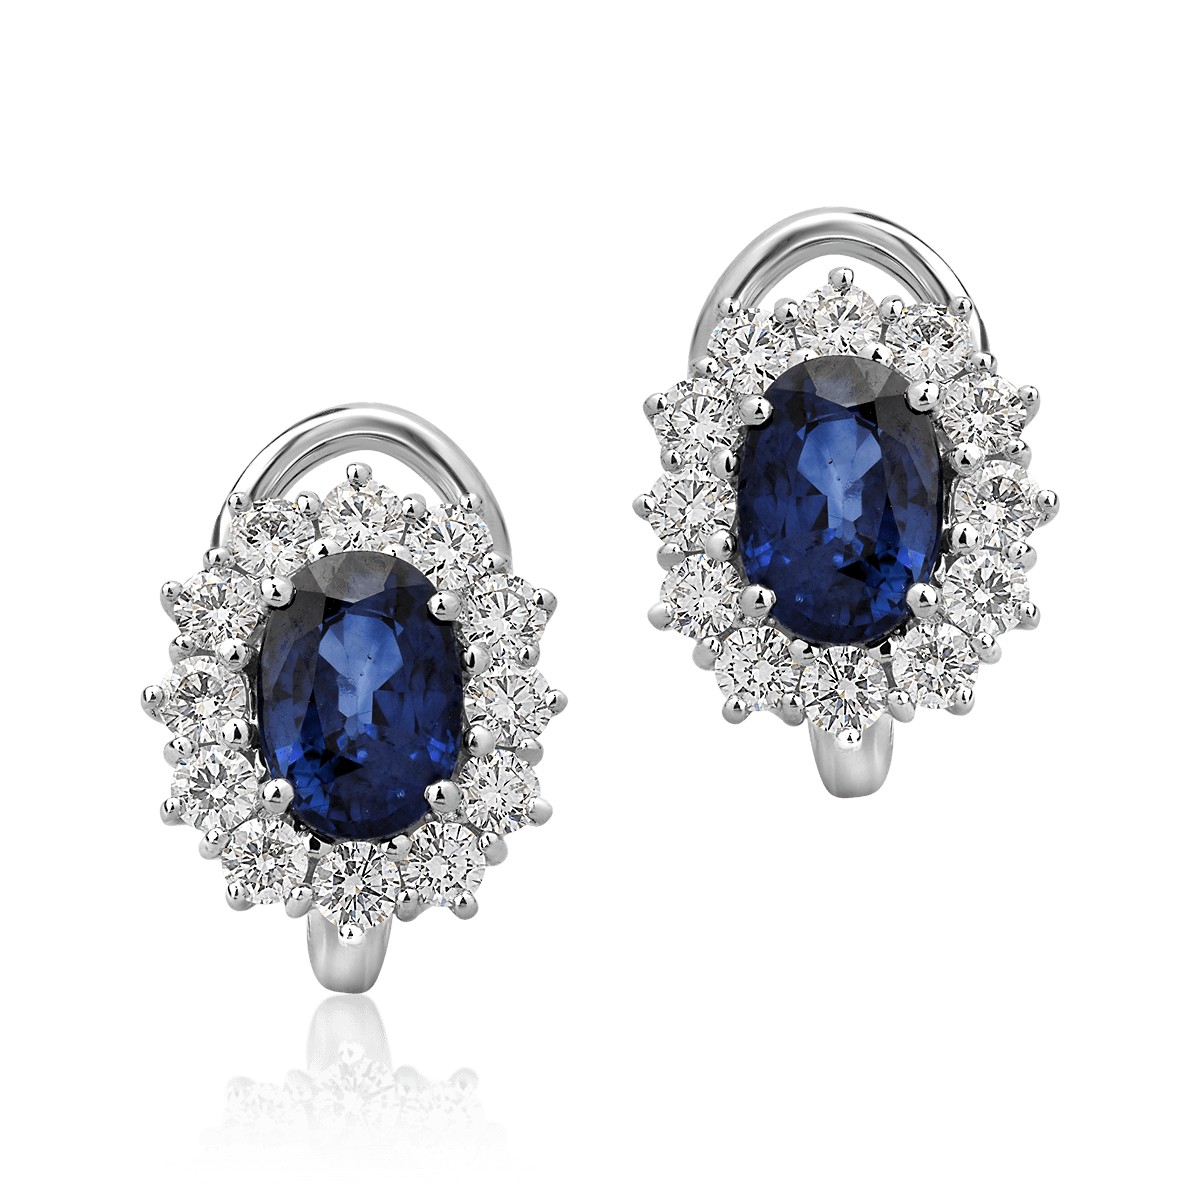 18K white gold earrings with 2ct sapphires and 0.92ct diamonds